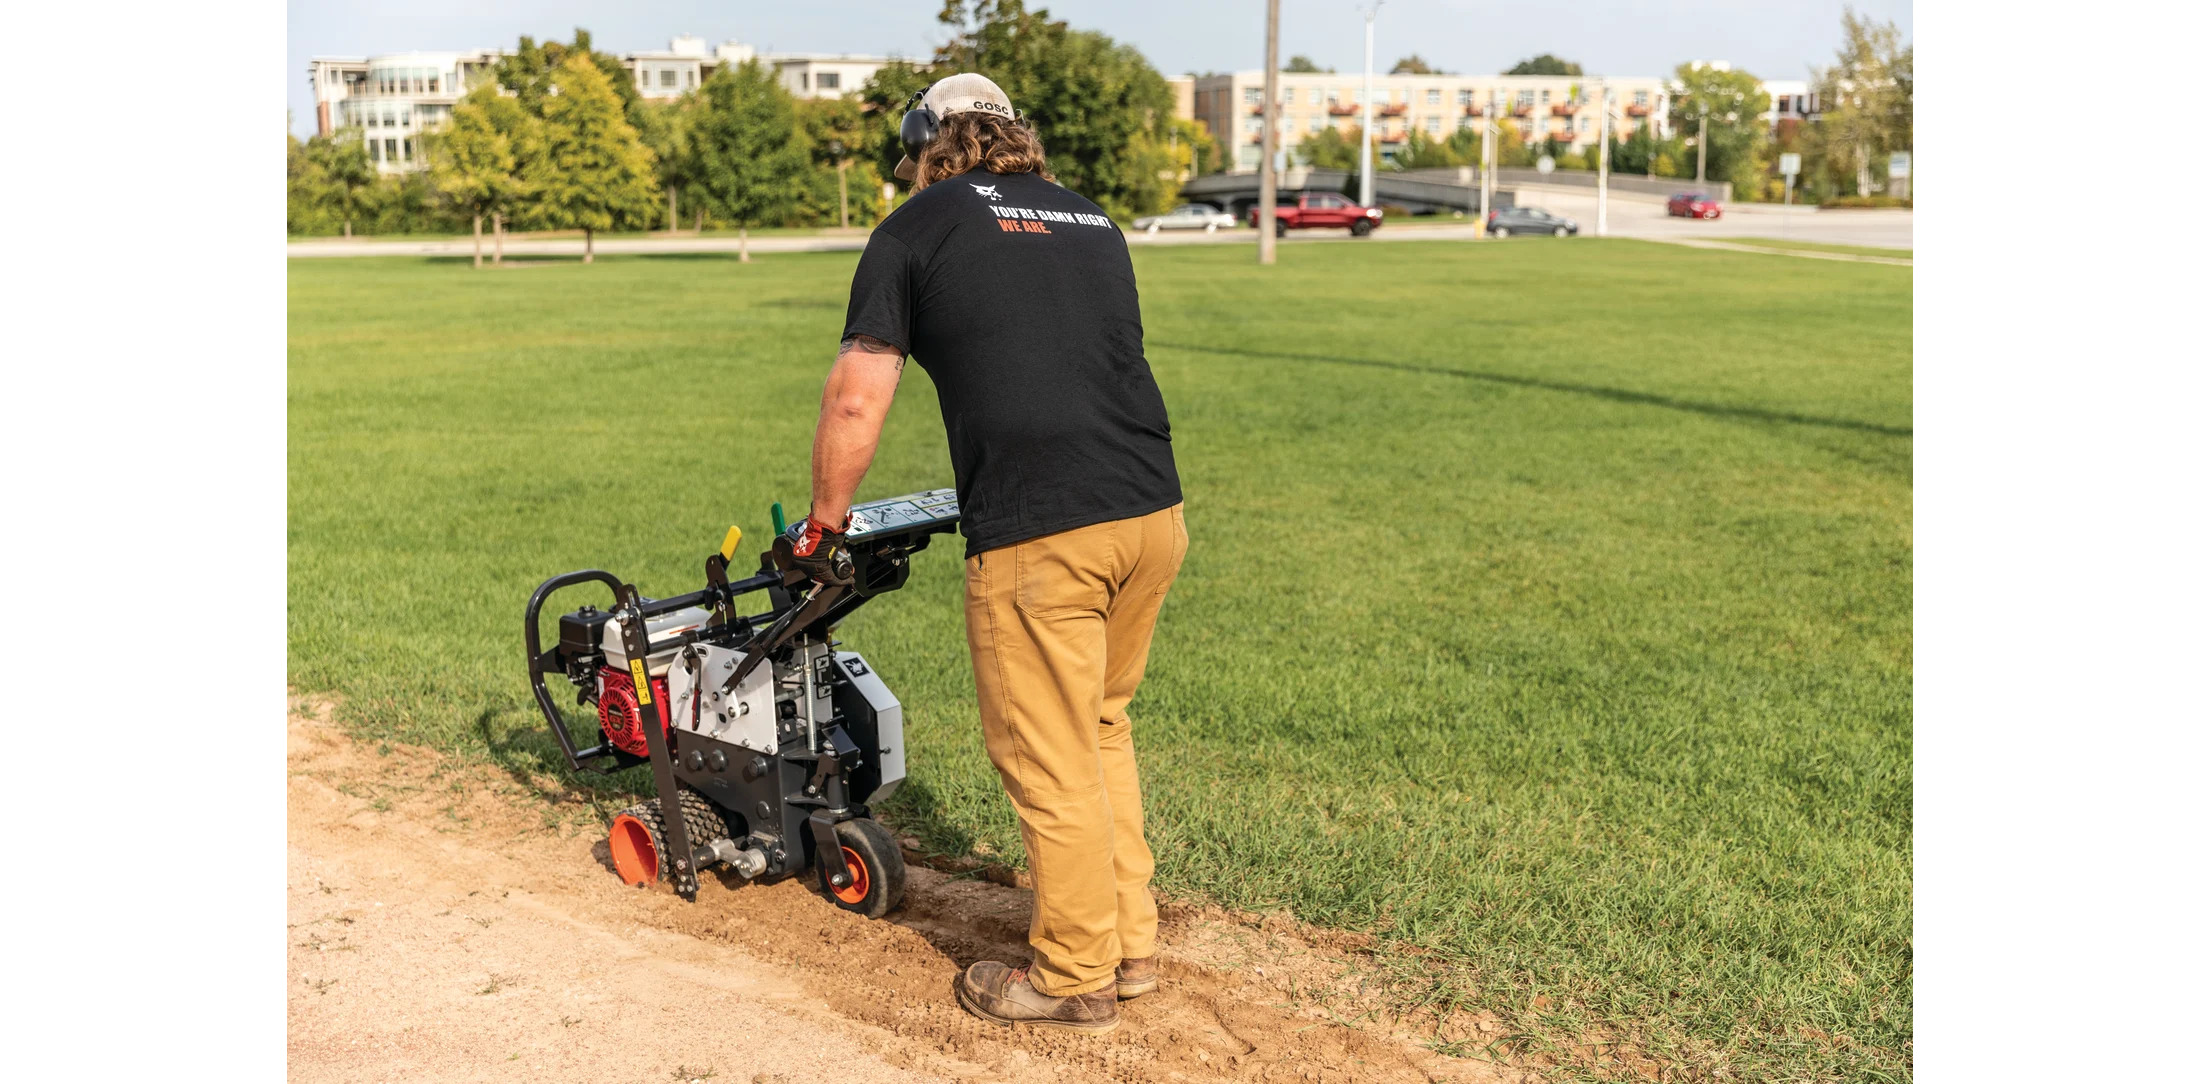 Browse Specs and more for the Bobcat SC18 Sod Cutter – Honda Engine - Bobcat of Huntsville